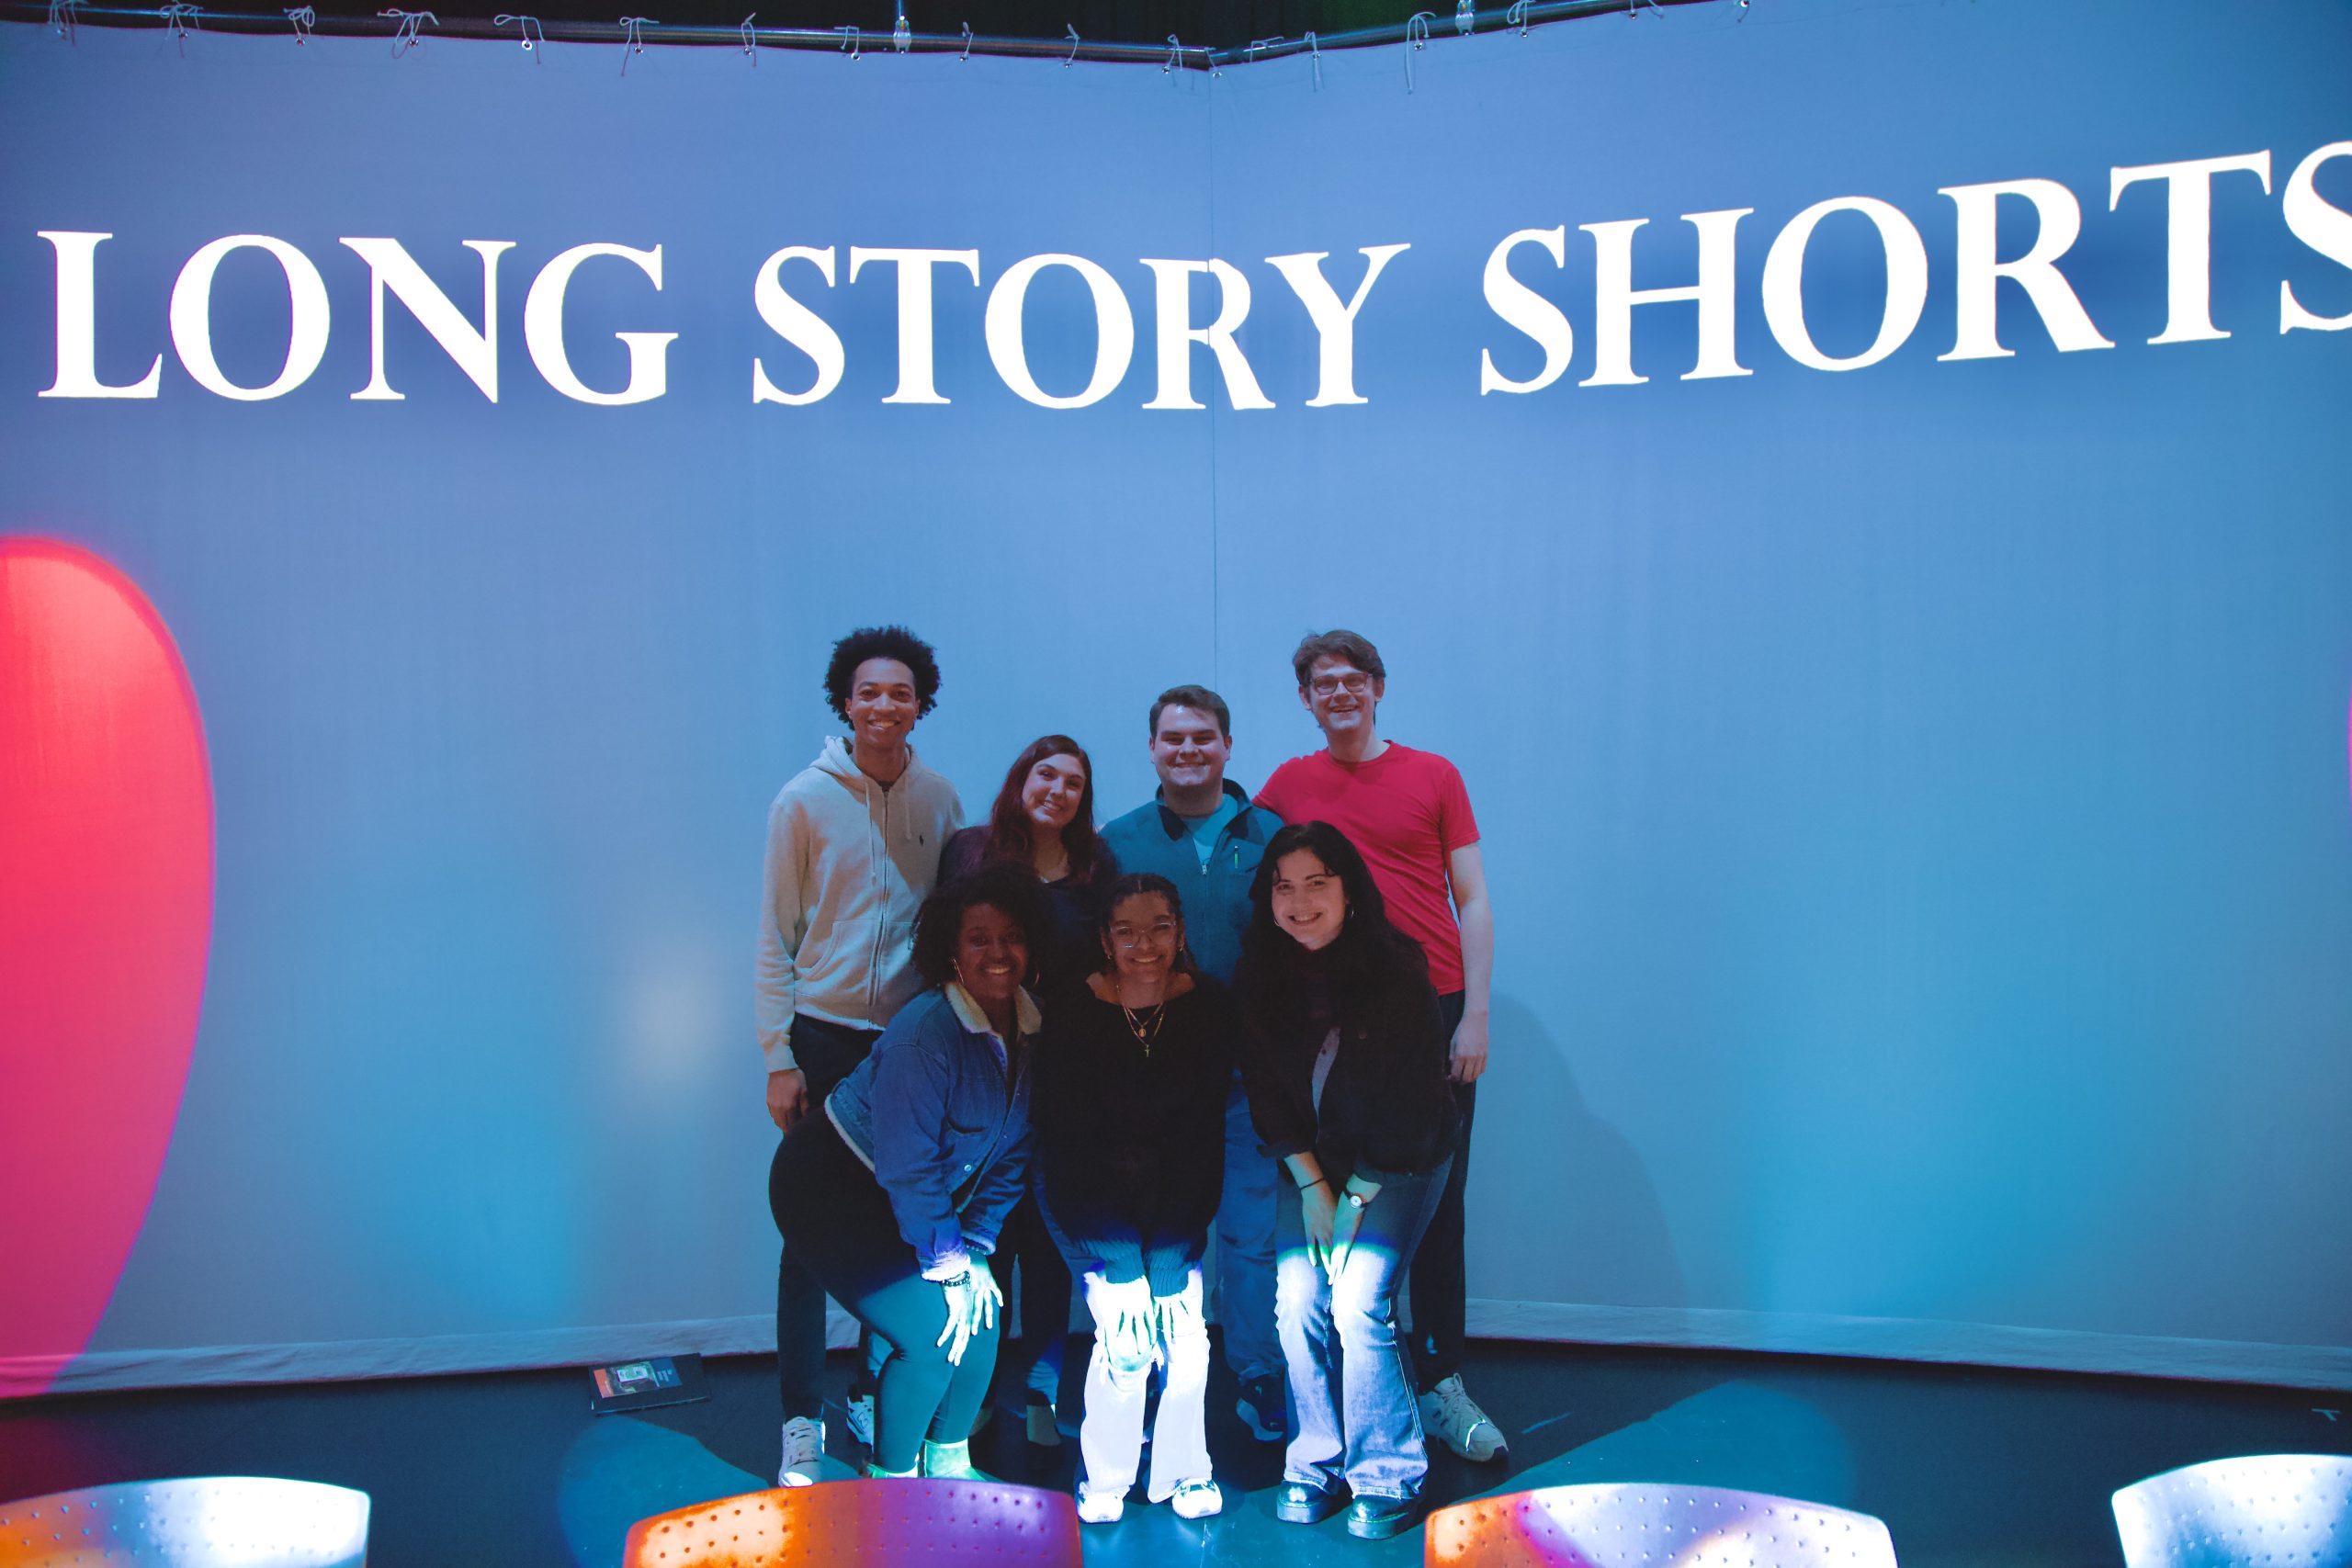 cast of the Long Story Shorts plays